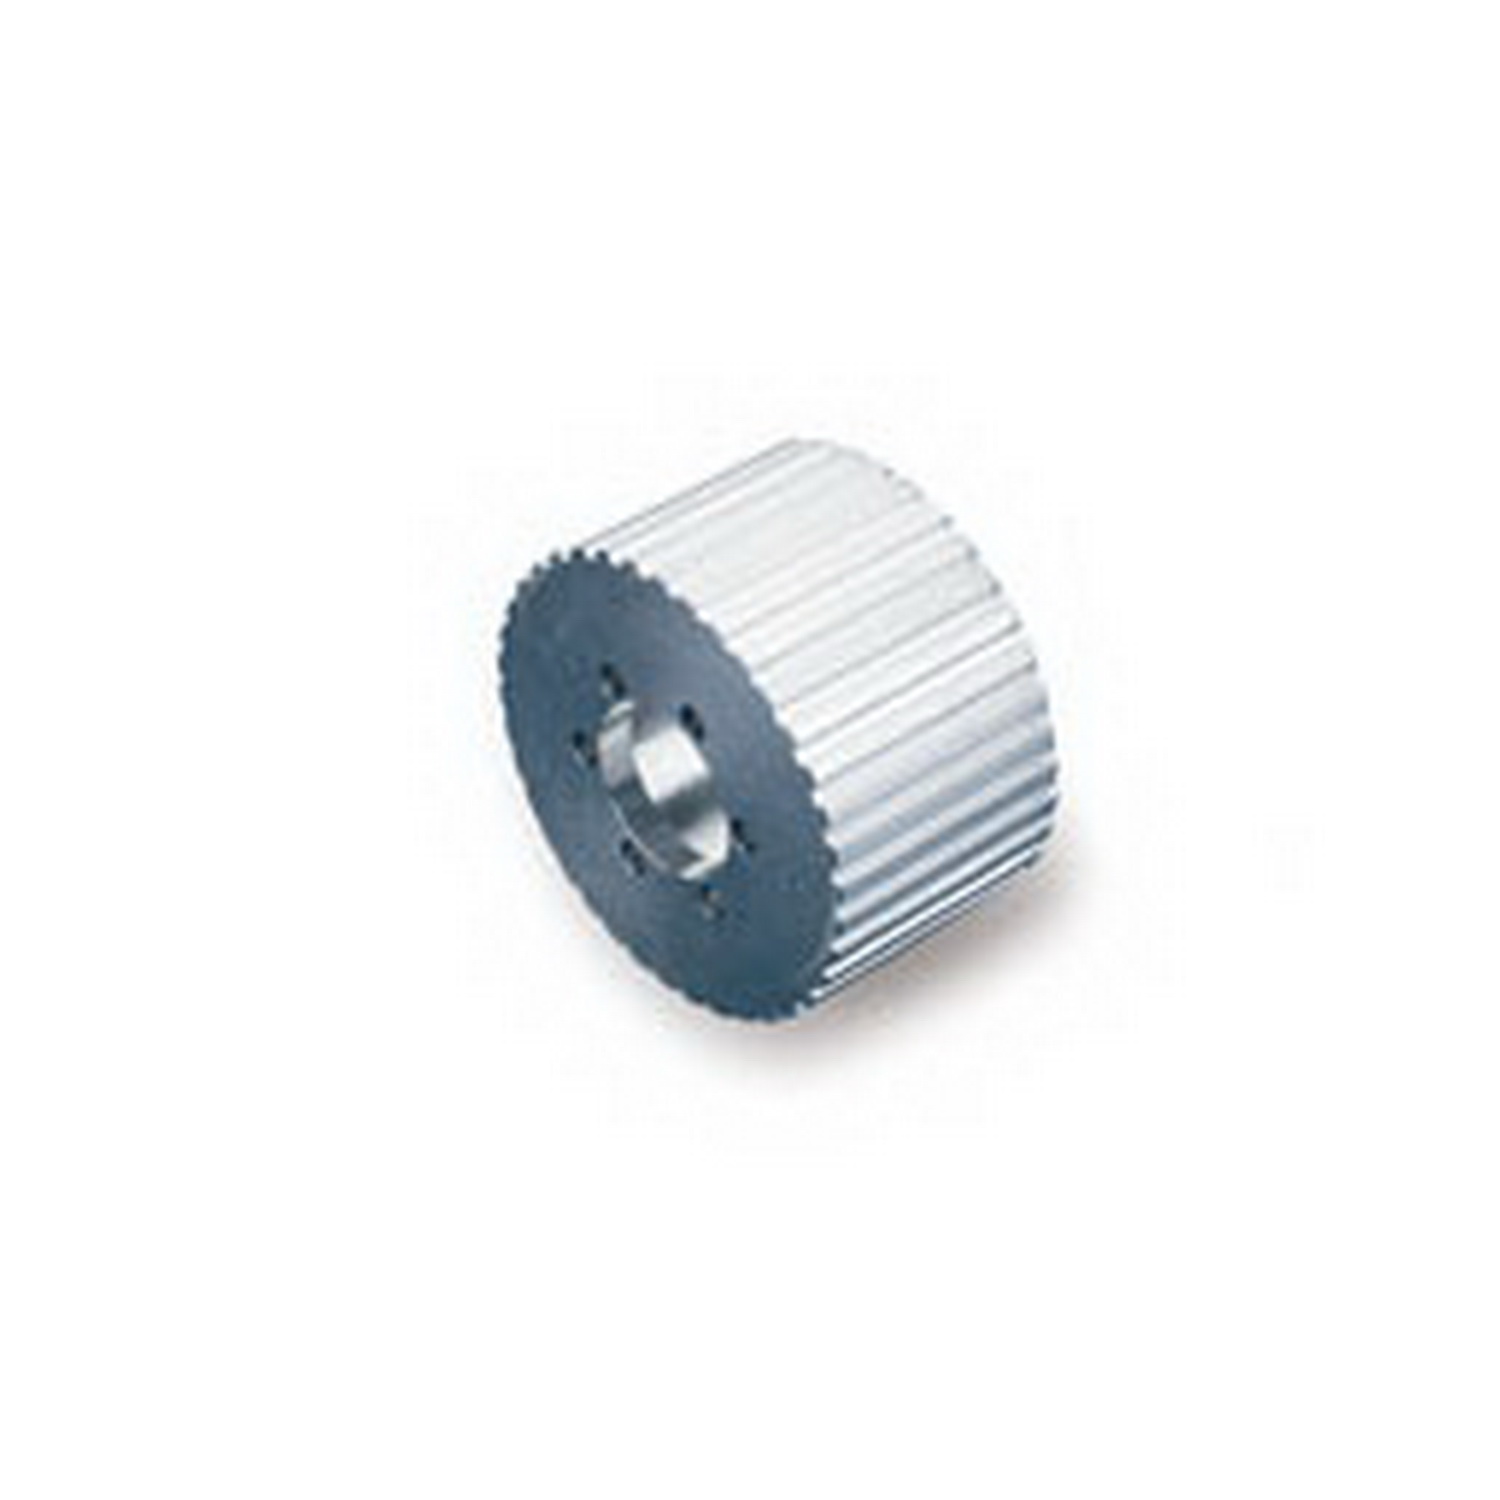 Weiand Weiand 7029-34 0.5 in. Pitch Drive Pulley